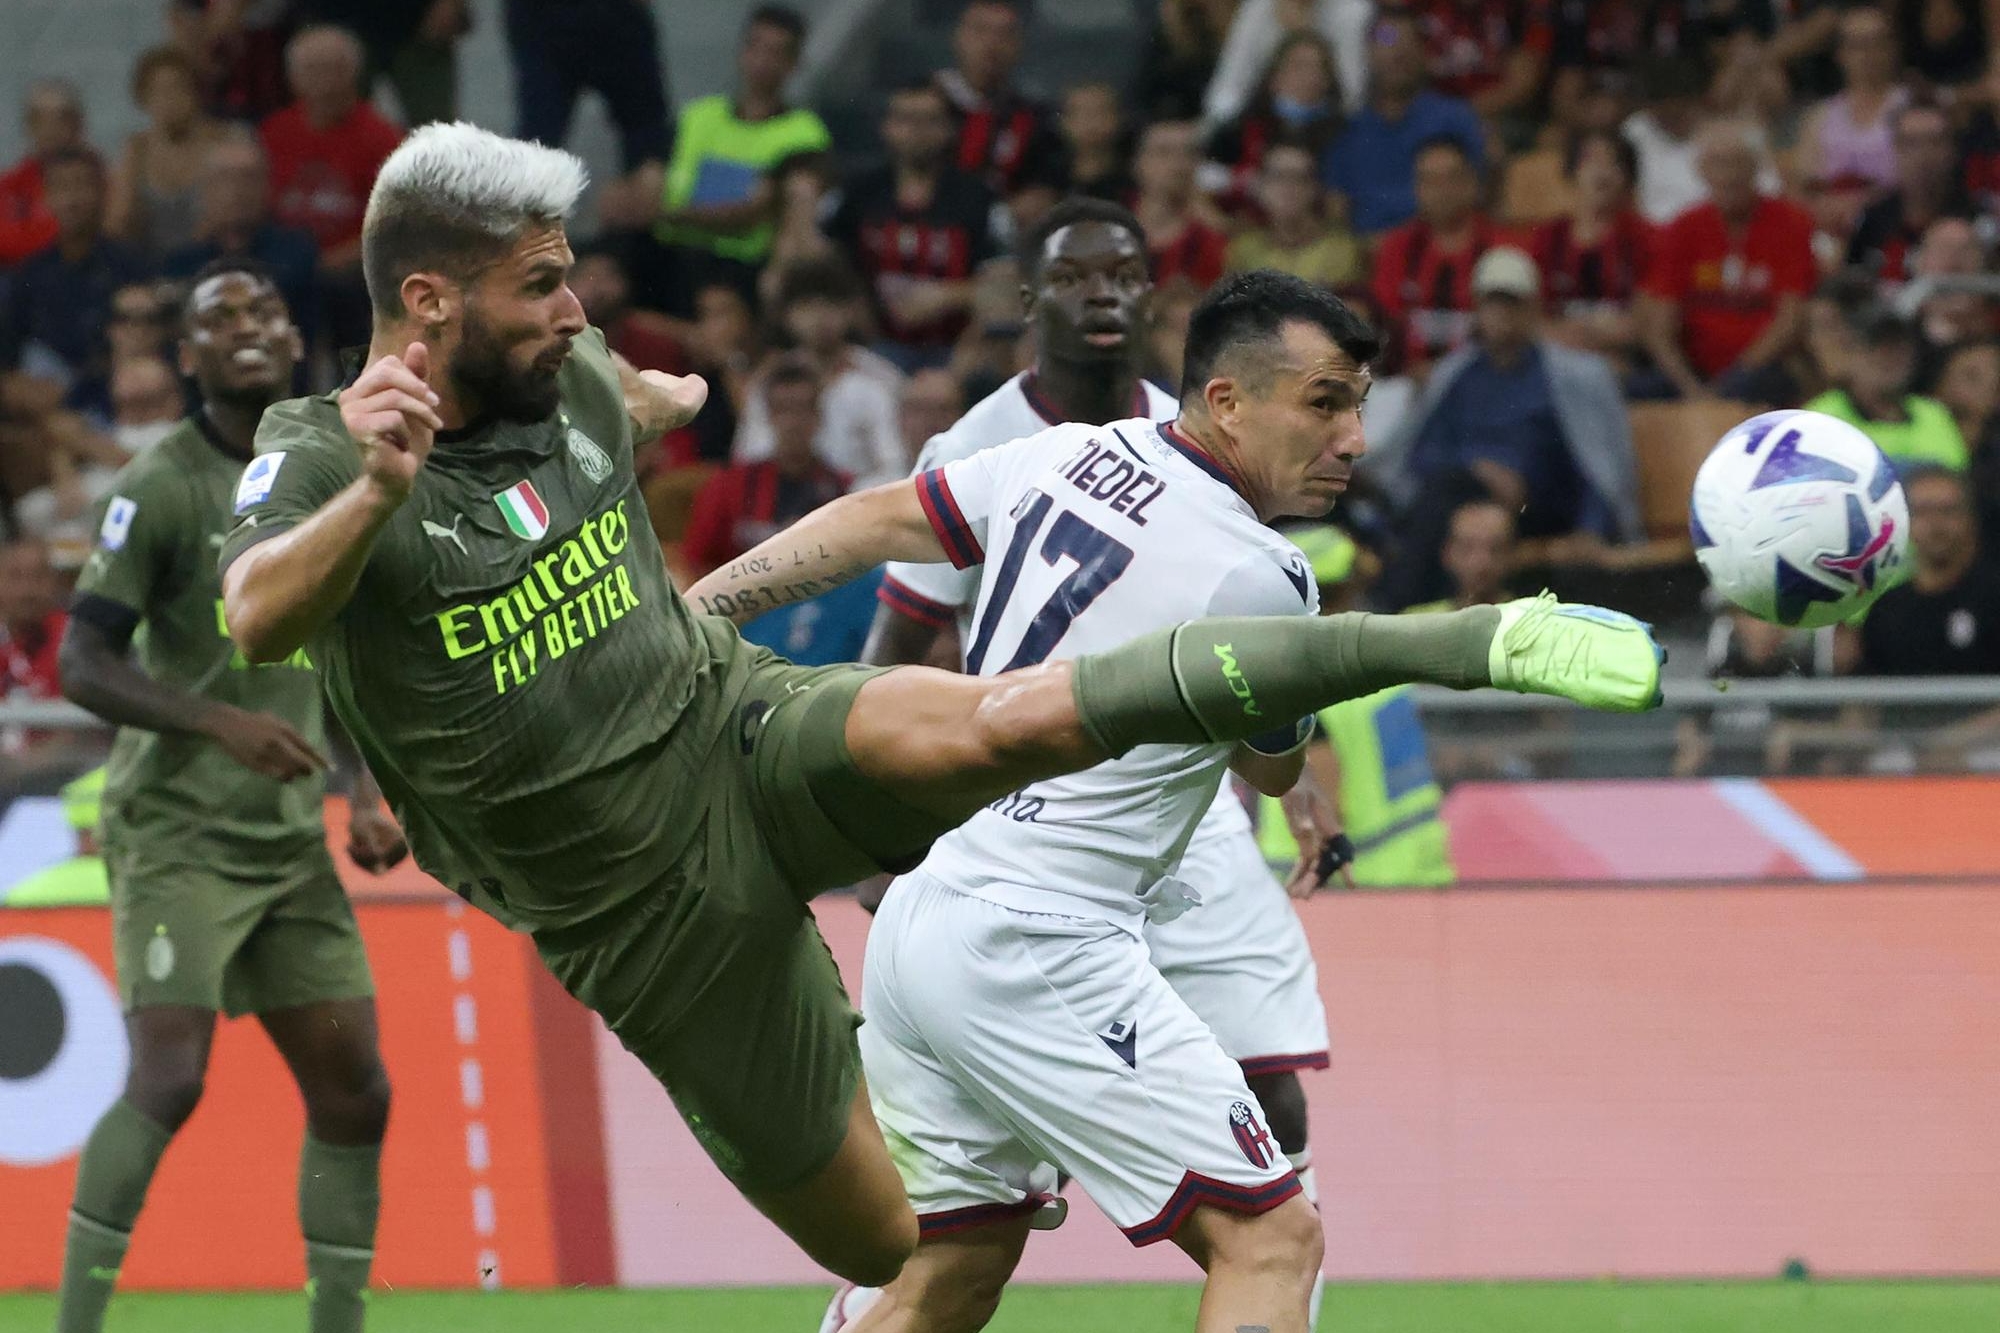 AC Milan's Olivier Giroud (L) scores against Bologna’s Gary Medel goal of 2 to 0 during the Italian serie A soccer match between AC Milan and Bologna at Giuseppe Meazza stadium in Milan, 27 August 2022. ANSA / MATTEO BAZZI